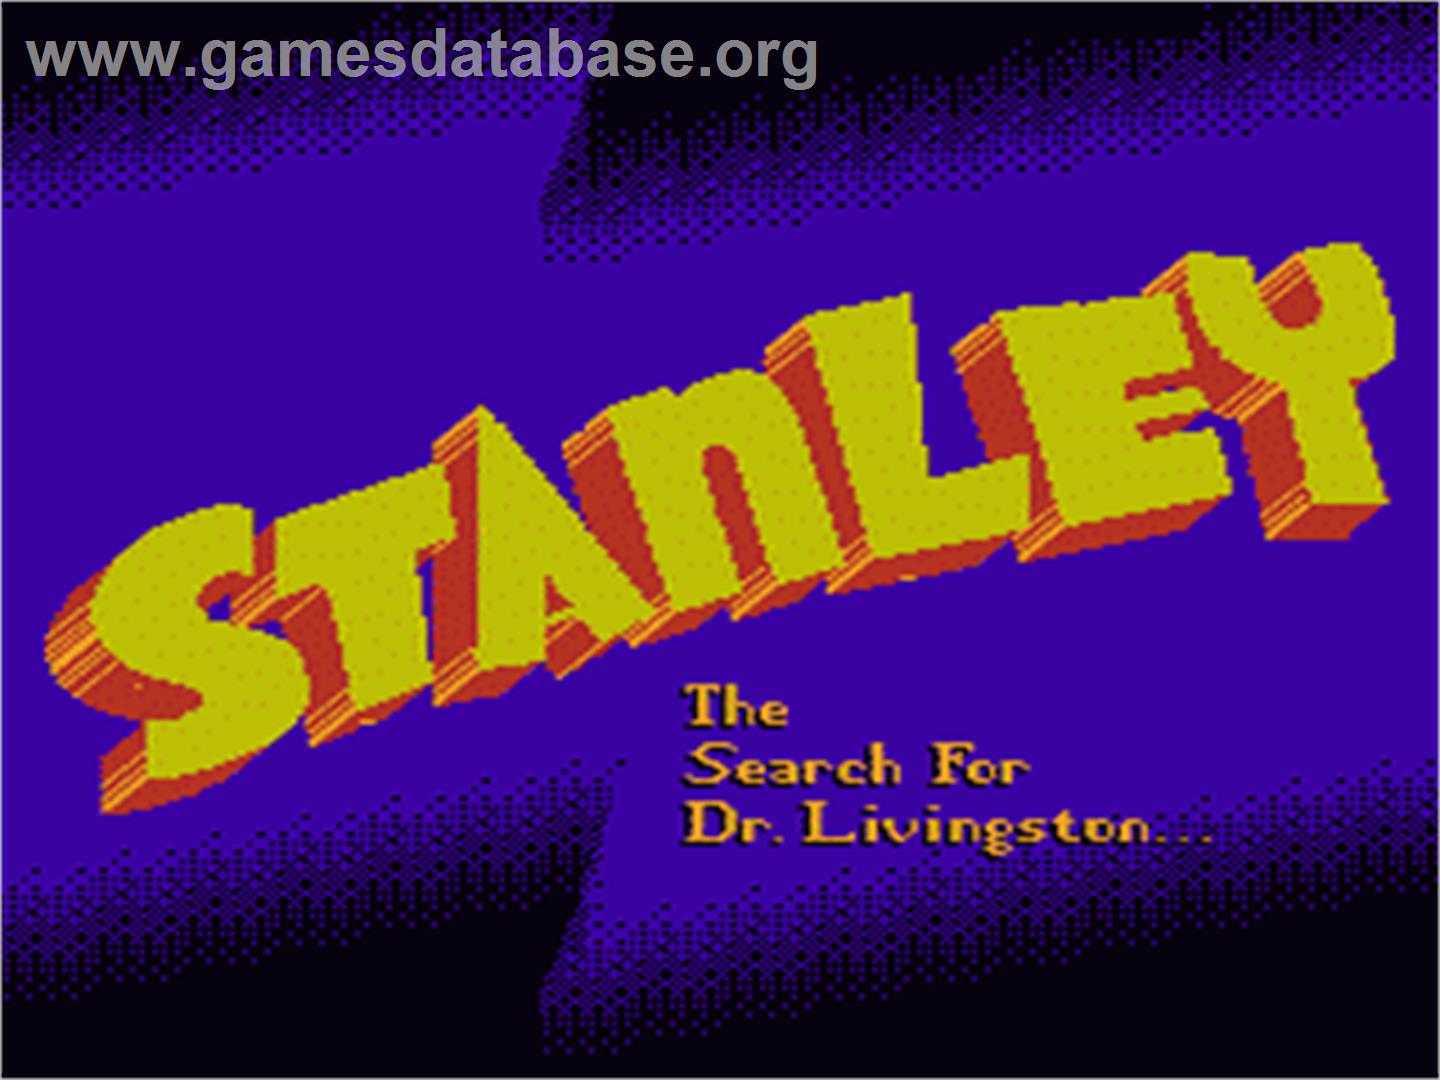 Stanley: The Search for Dr. Livingston - Nintendo NES - Artwork - Title Screen